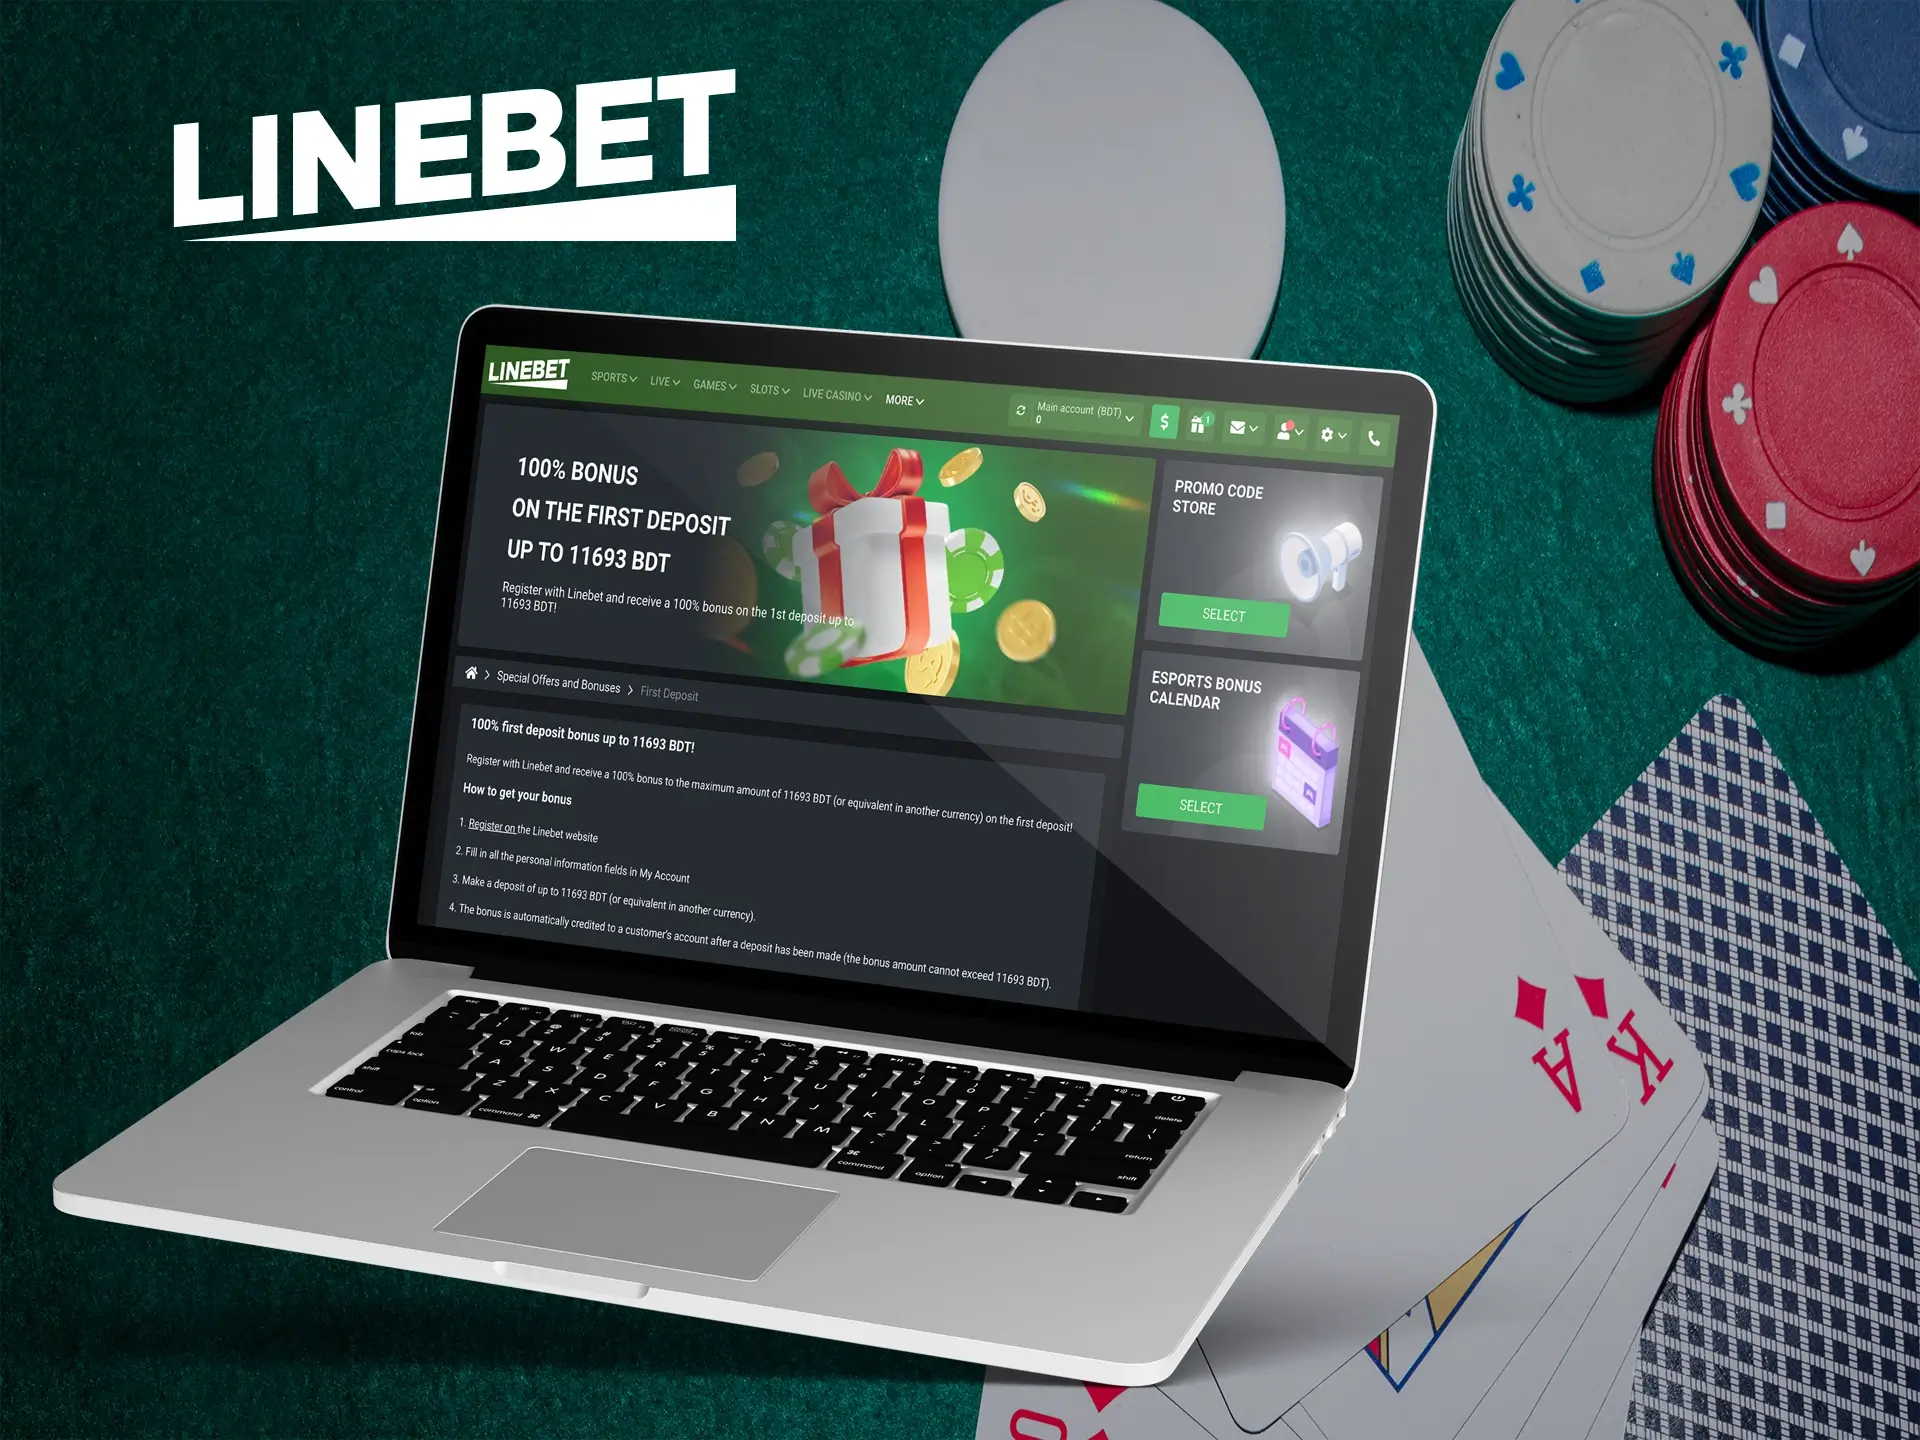 Read the rules on how to use a Linebet promo code.